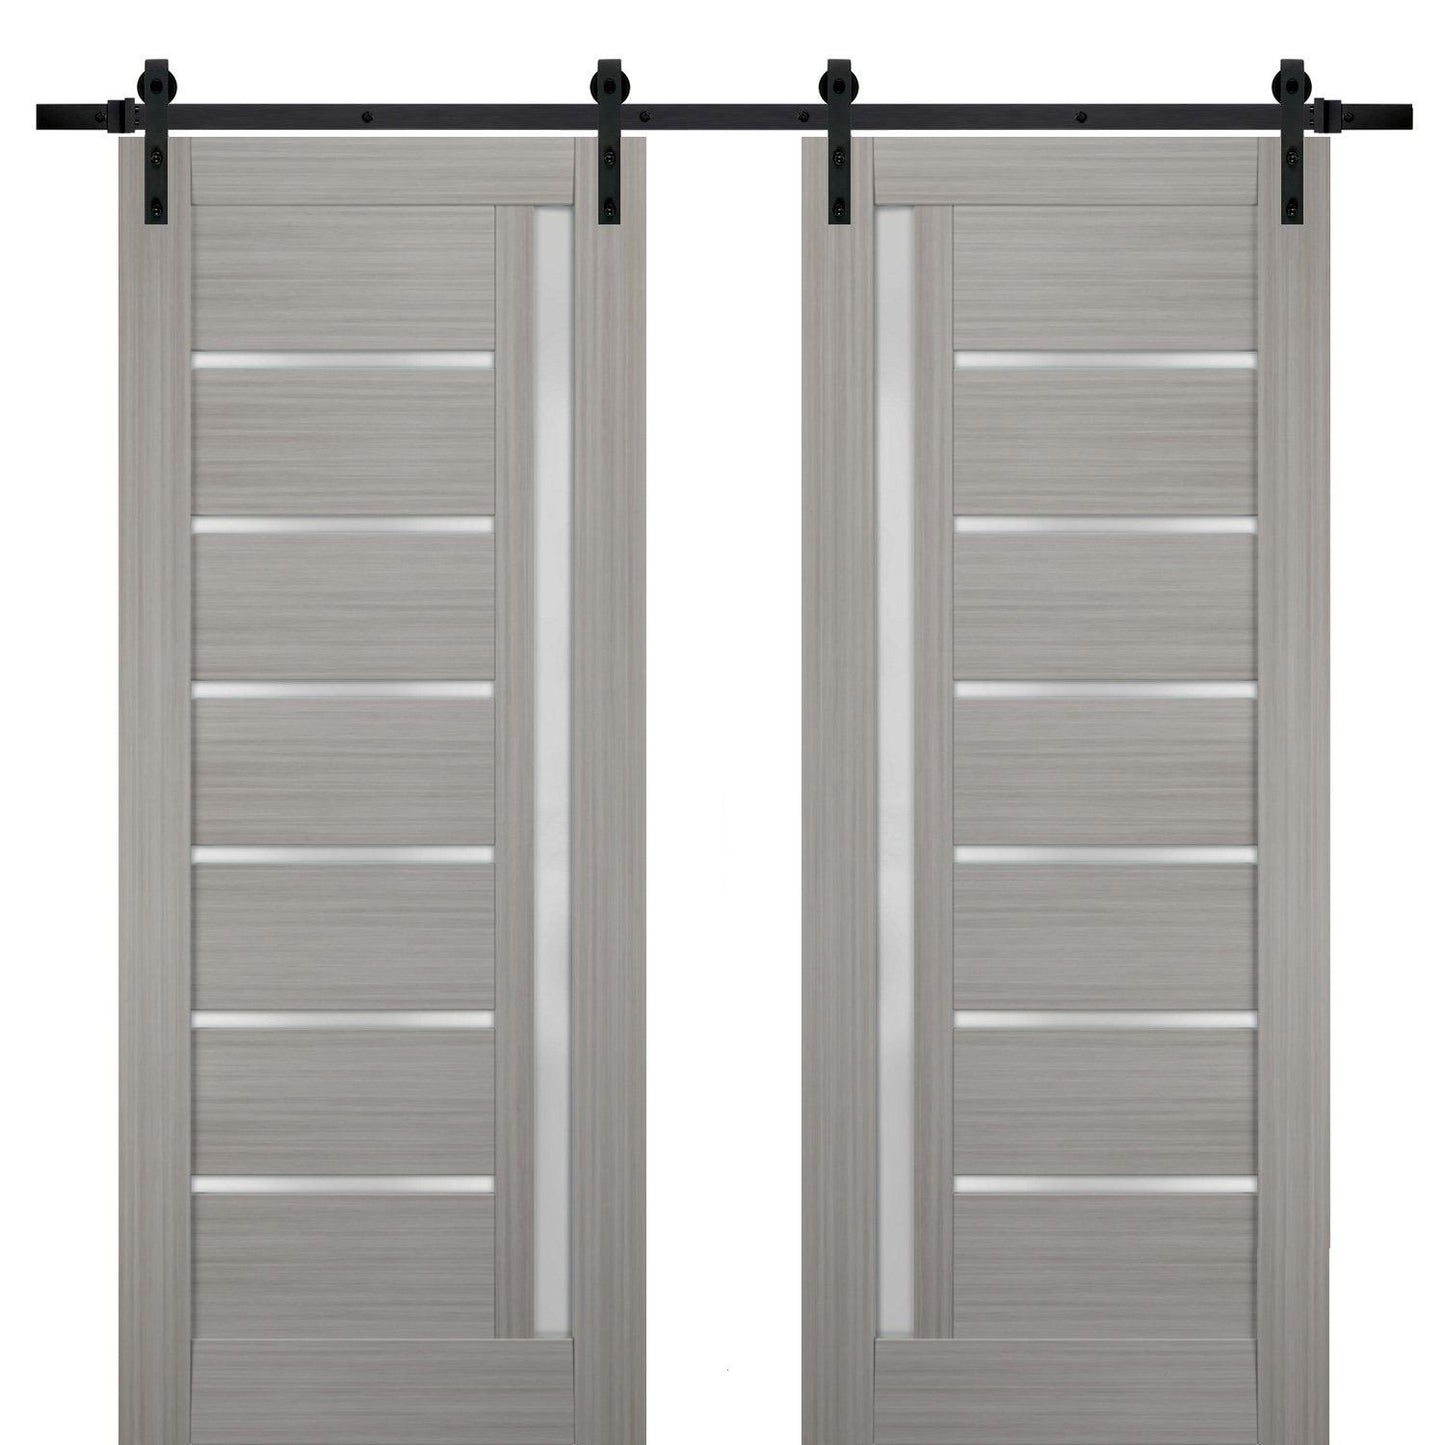 Quadro 4088 Grey Ash Double Barn Door with Frosted Glass | Black Rail